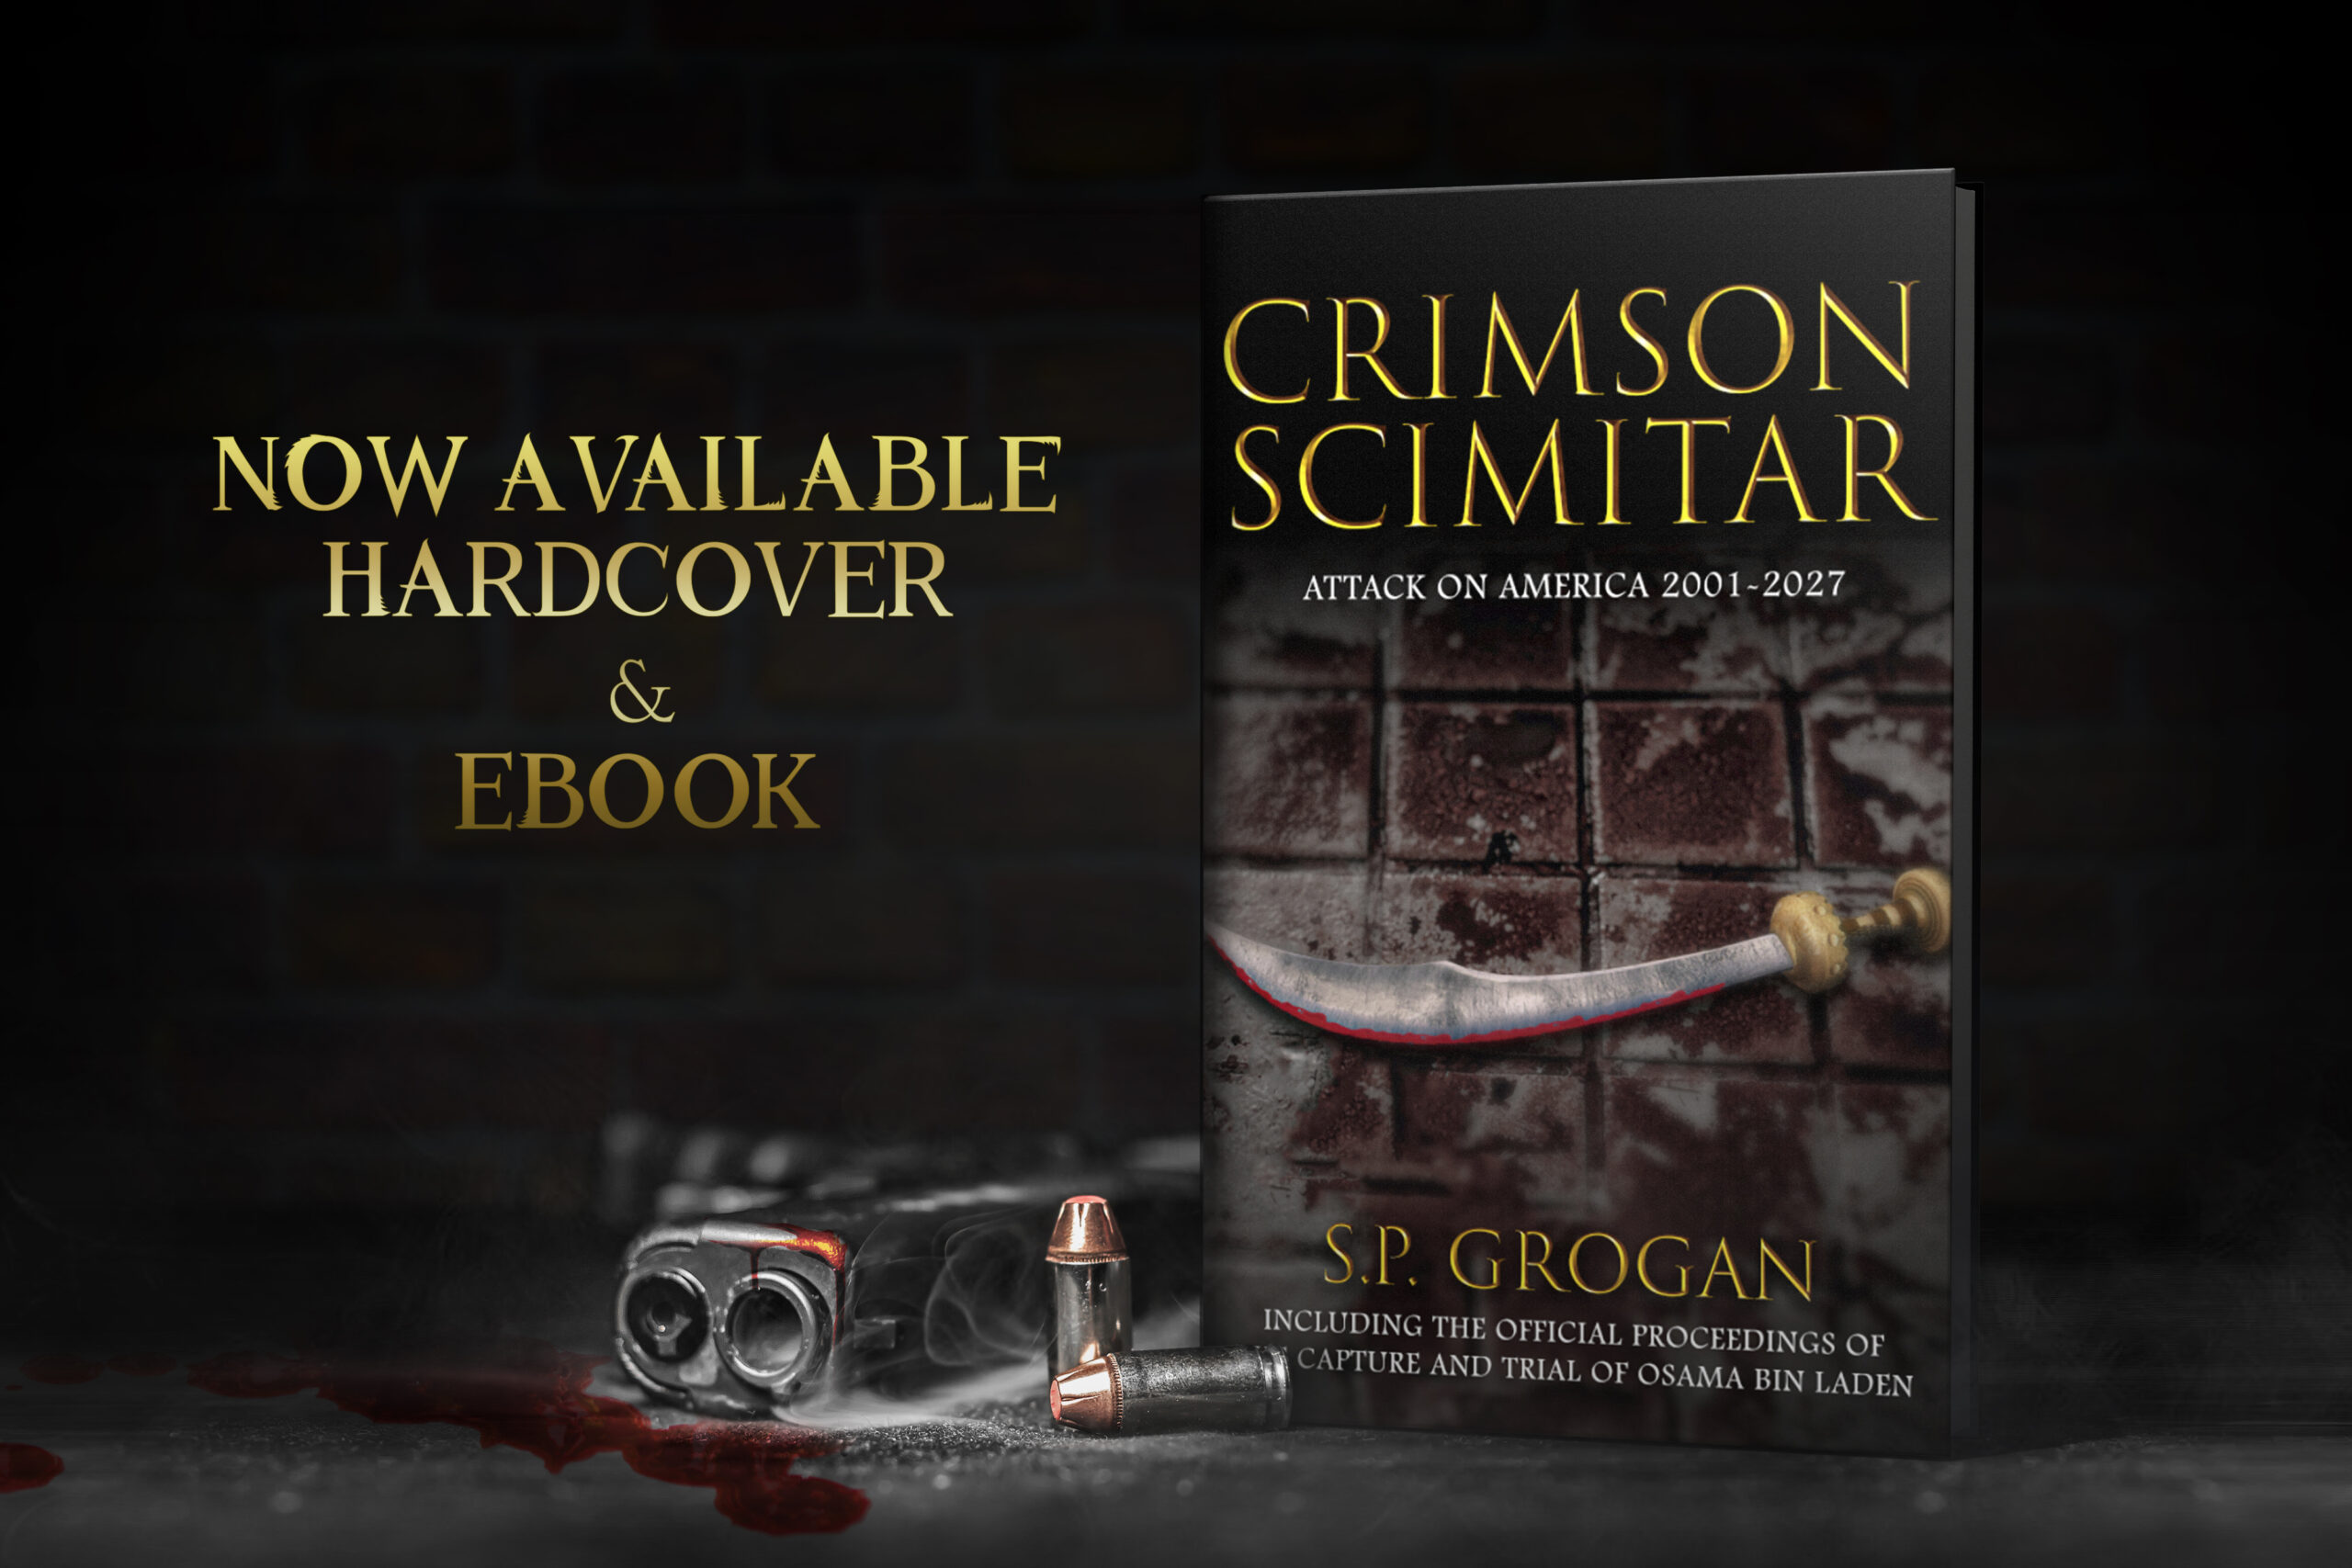 Crimson Scimitar by S.P. Grogan, now available from Histria Books